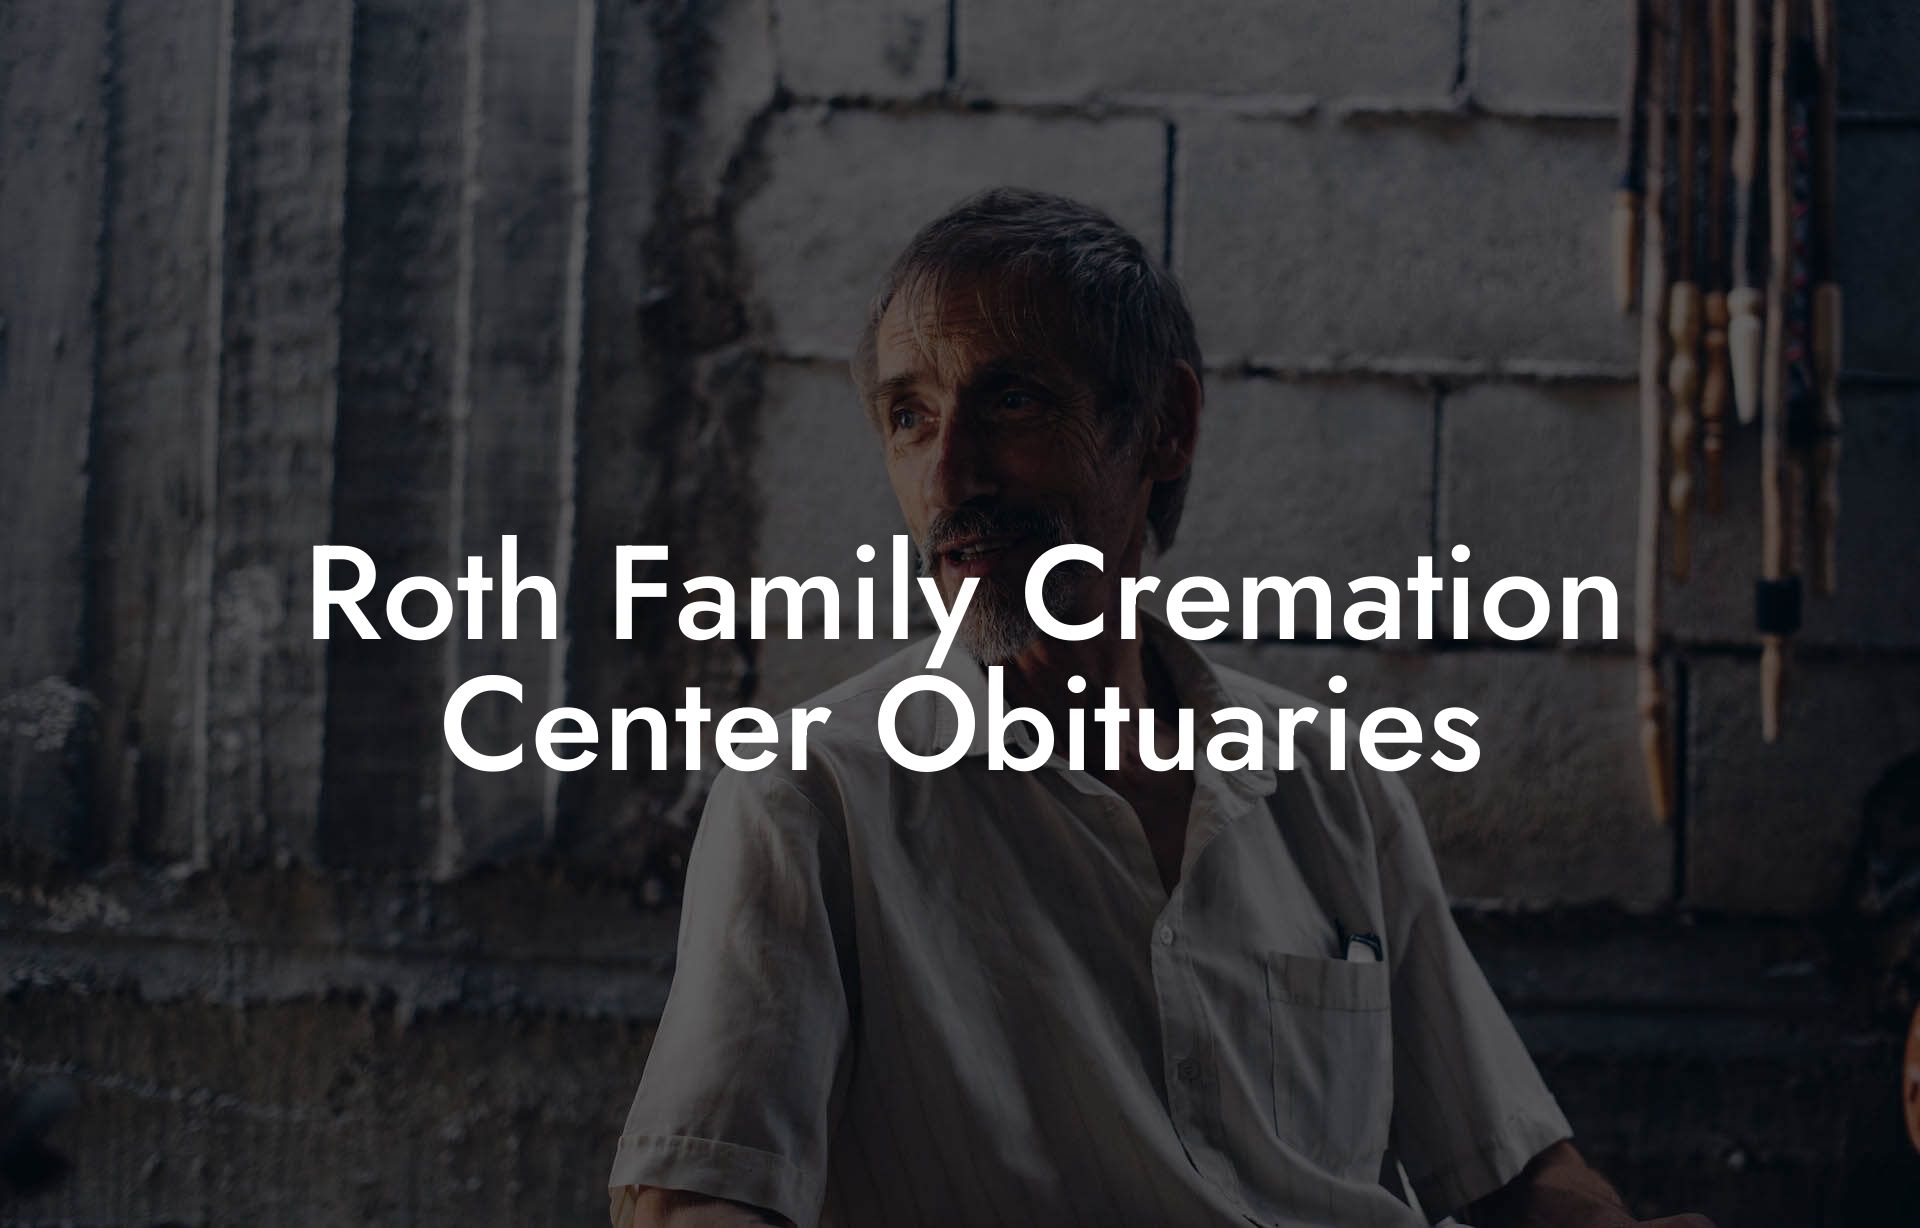 Roth Family Cremation Center Obituaries